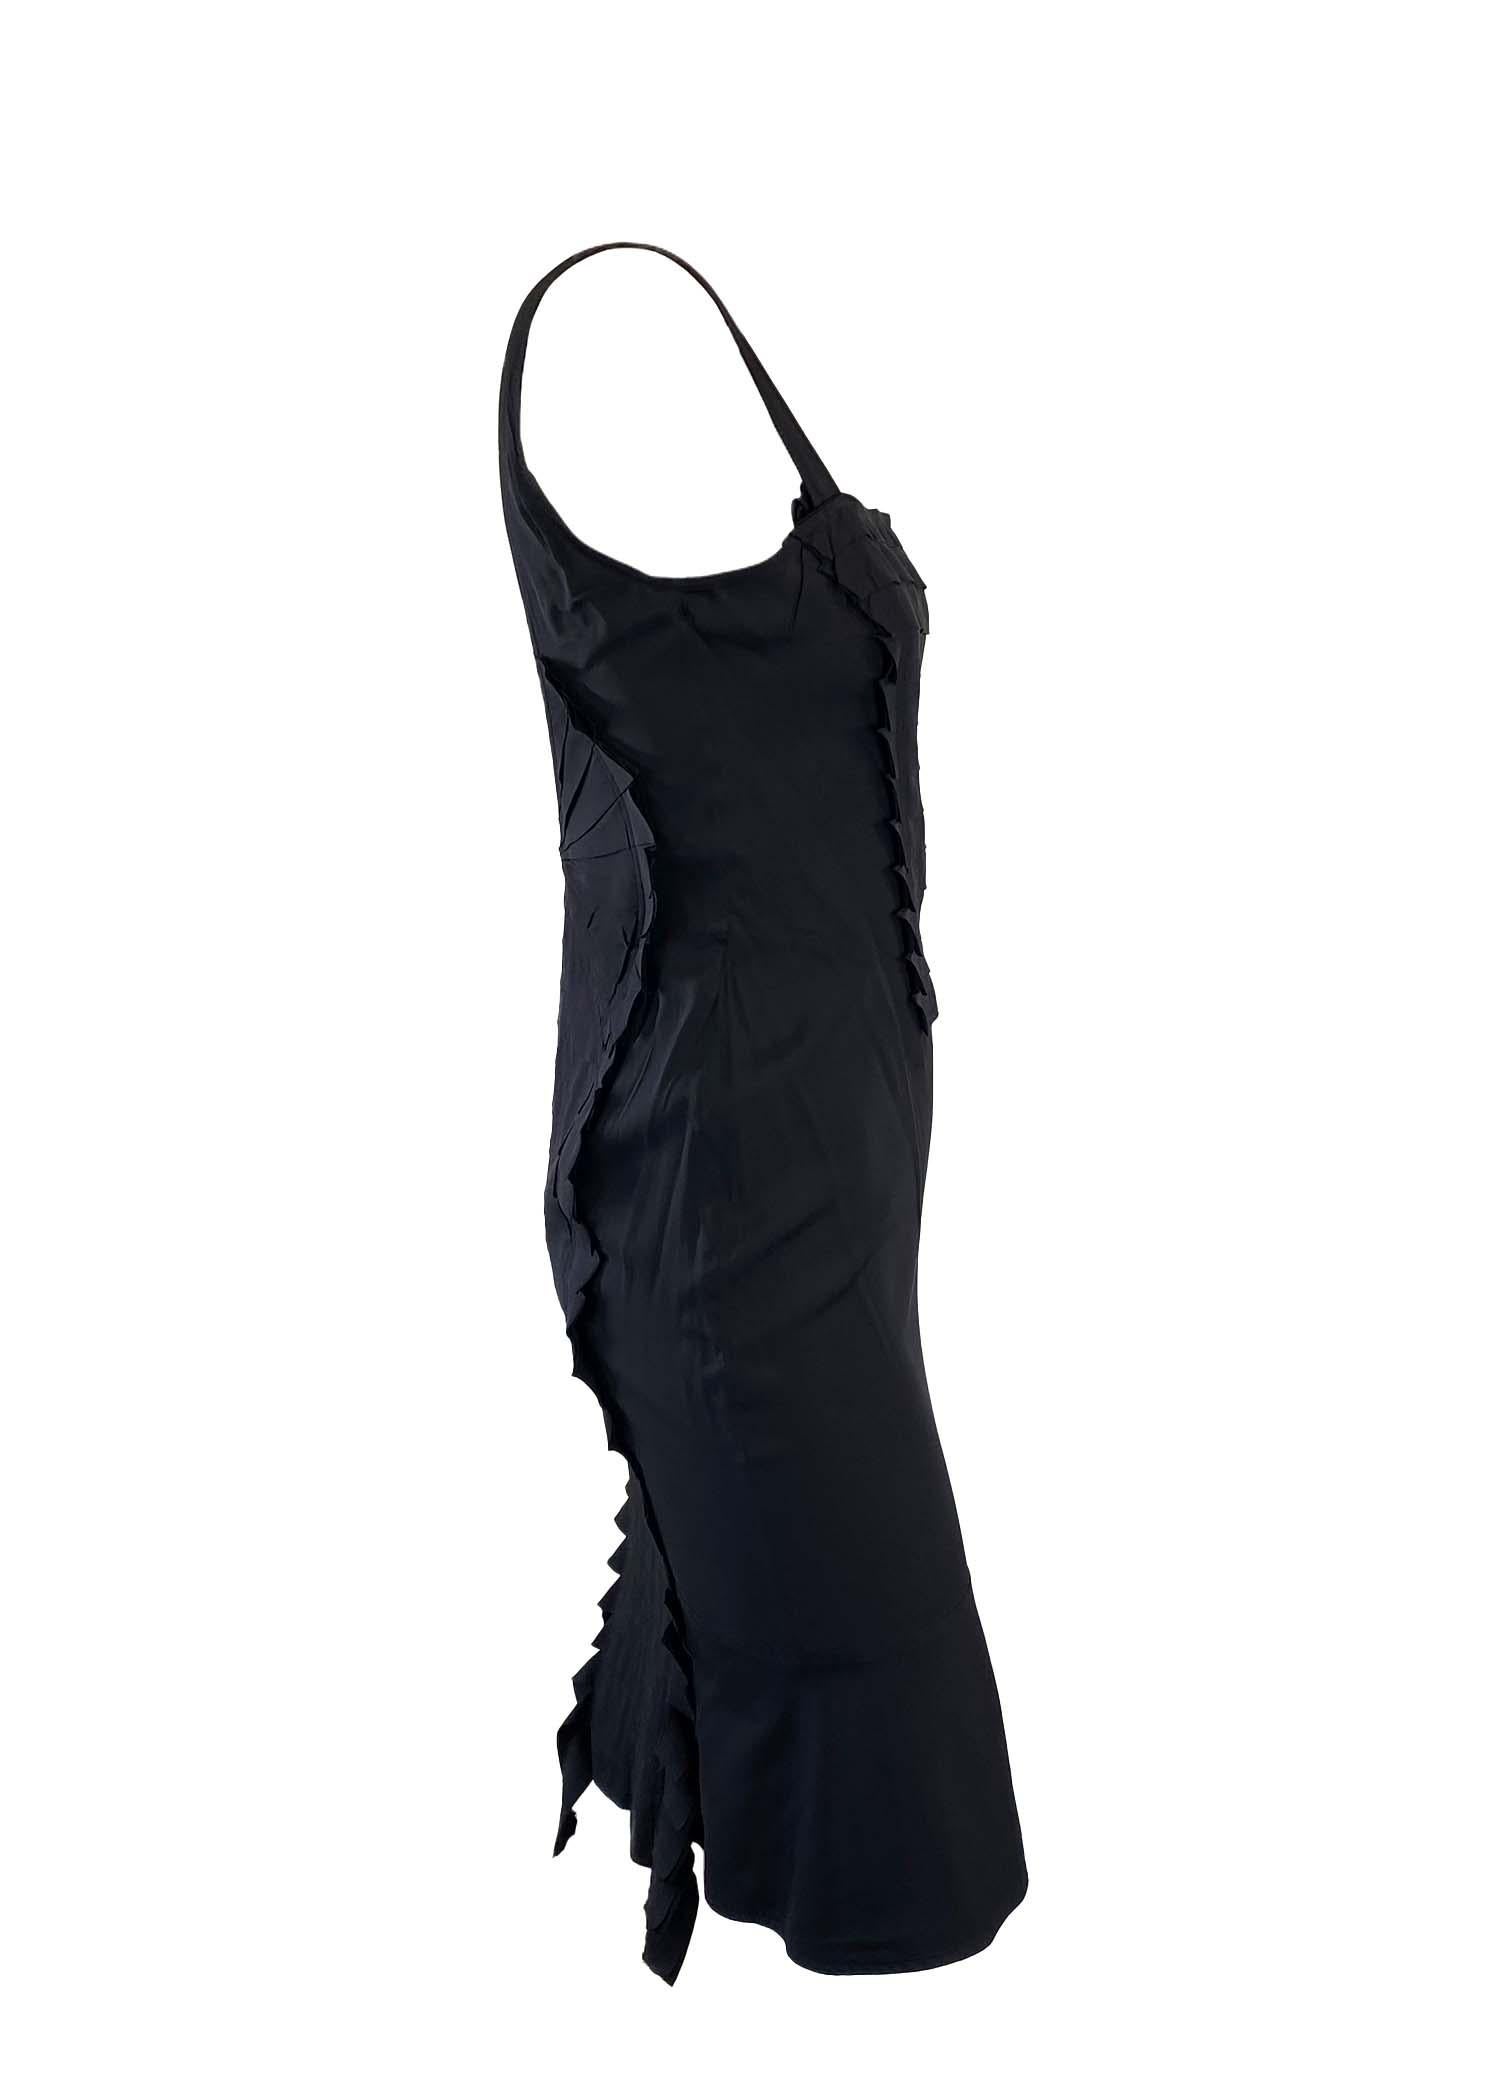 Women's S/S 2004 Gucci by Tom Ford Black Ribbon Appliqué Sleeveless Stretch Silk Dress For Sale